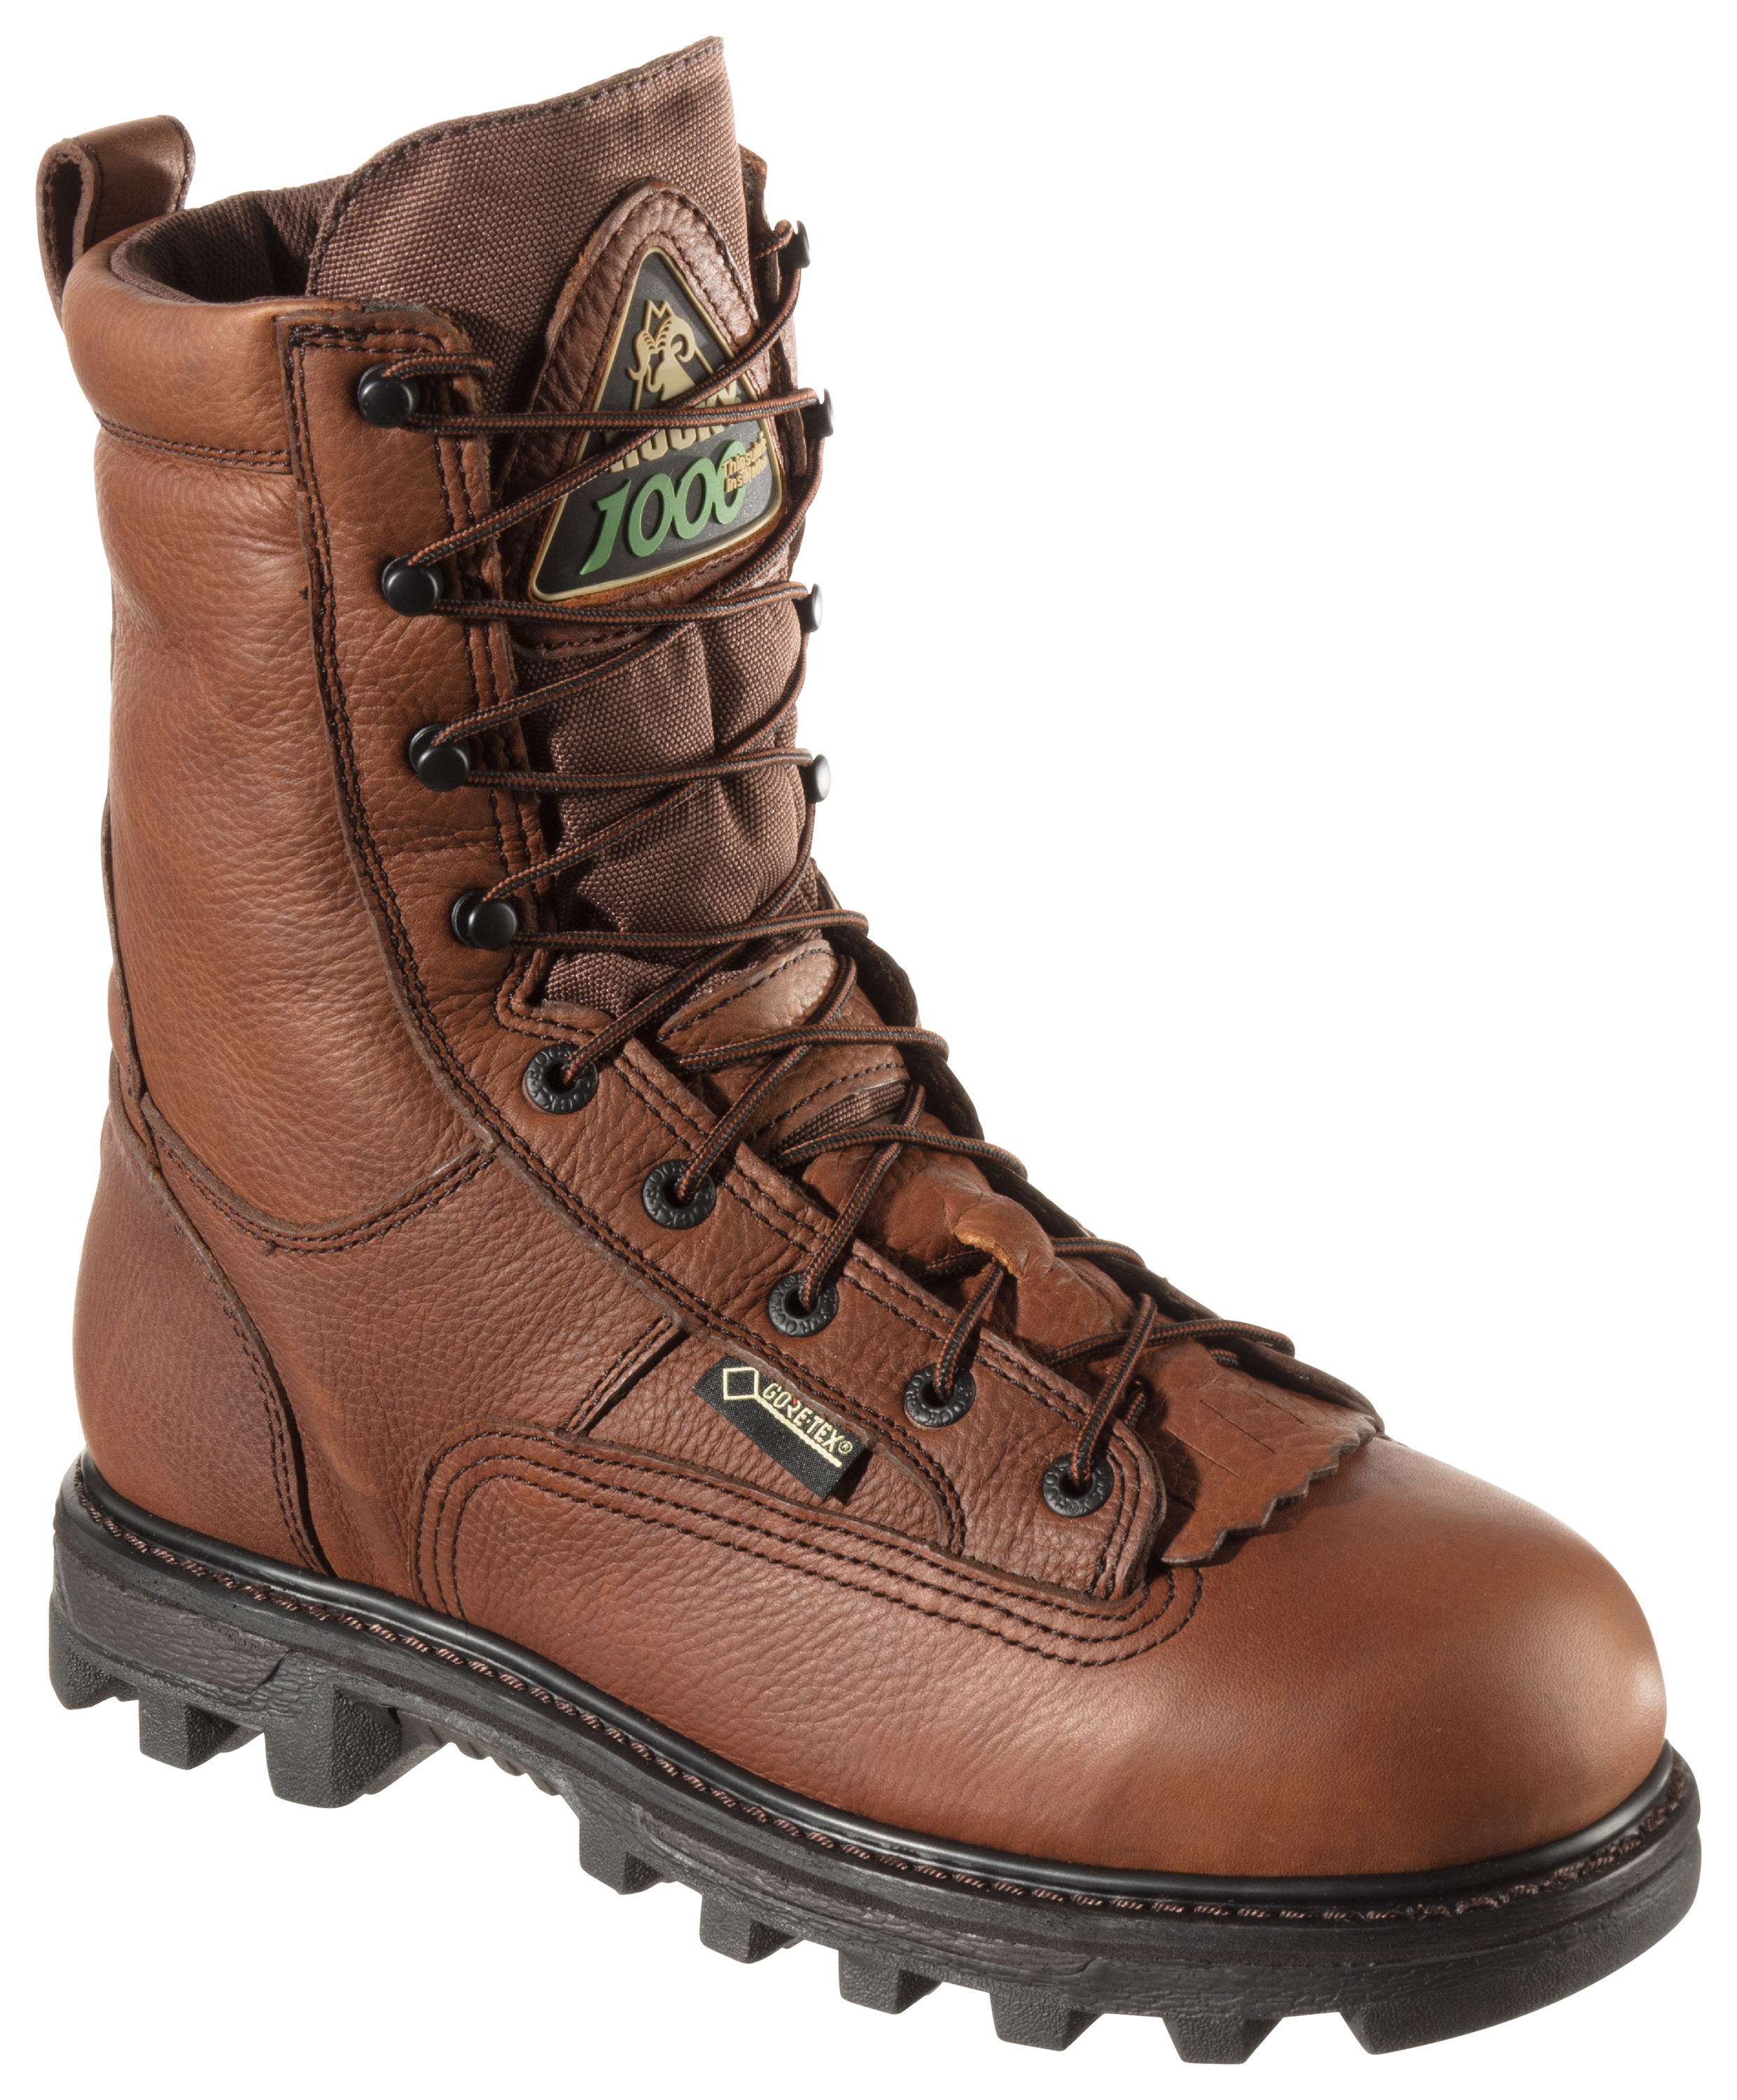 ROCKY BearClaw 3D GORE-TEX 1,000-Gram Insulated Hunting Boots for Men - Brown - 11.5M